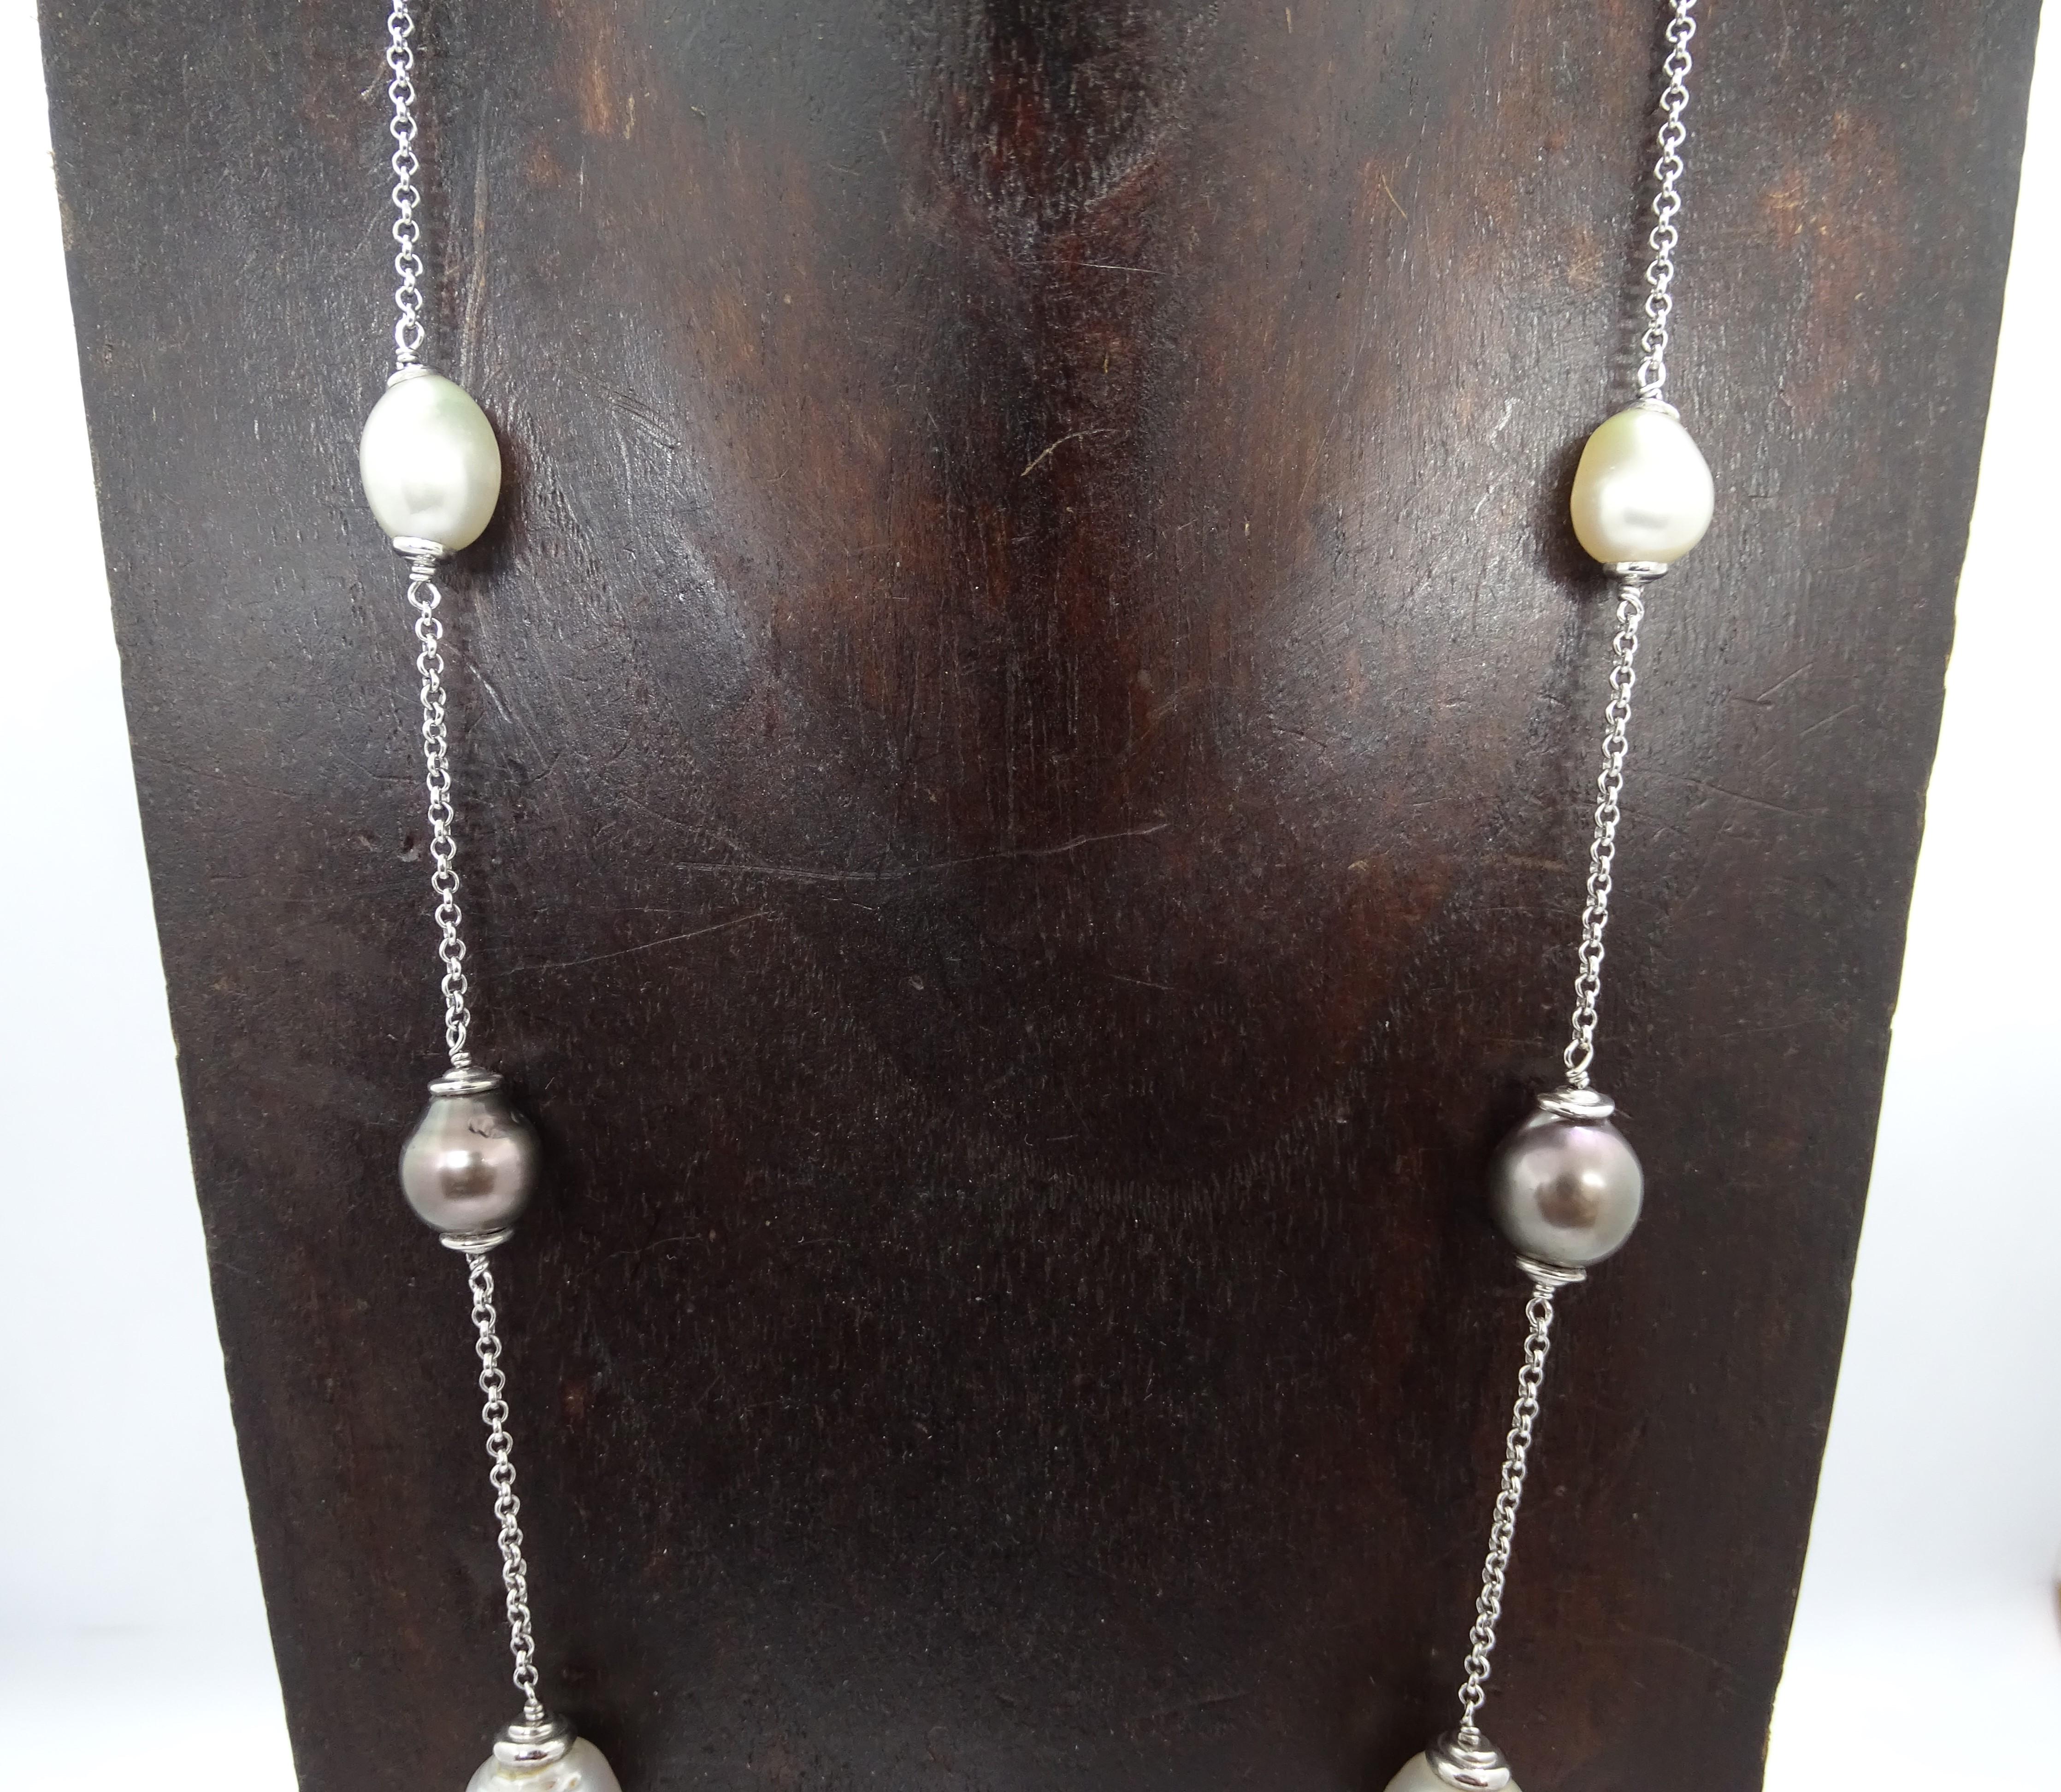 Australian, golden, tahitian and chocolate pearl necklace - white gold chain 5